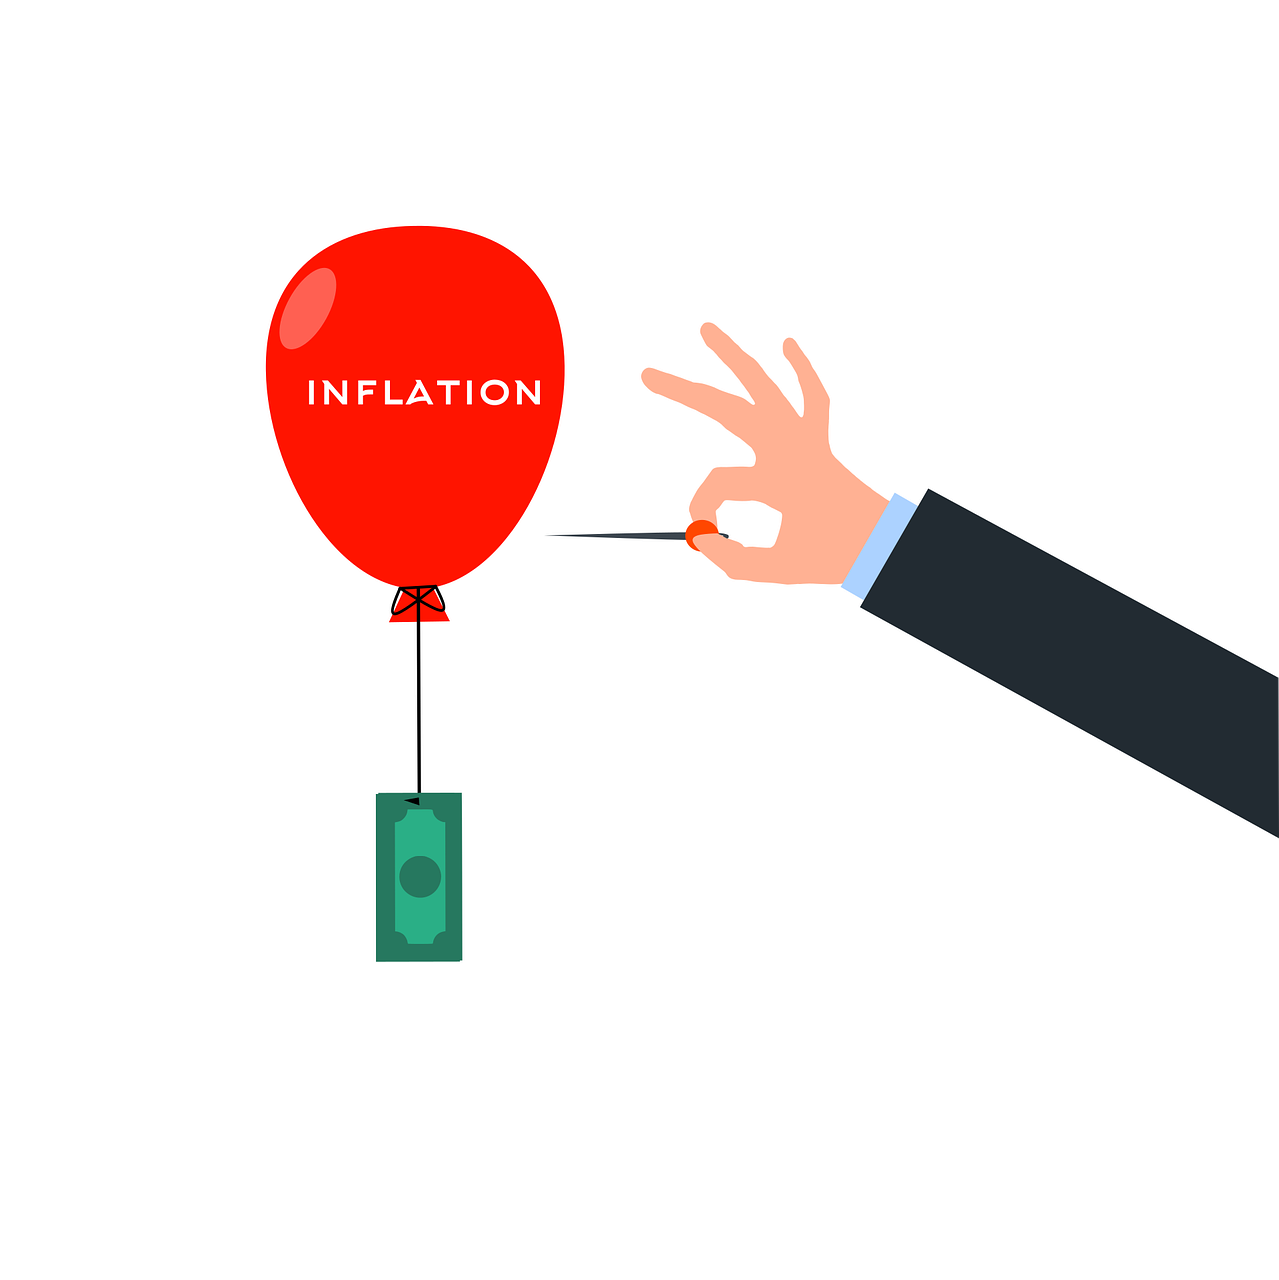 7 tips to help your small business adjust for inflation